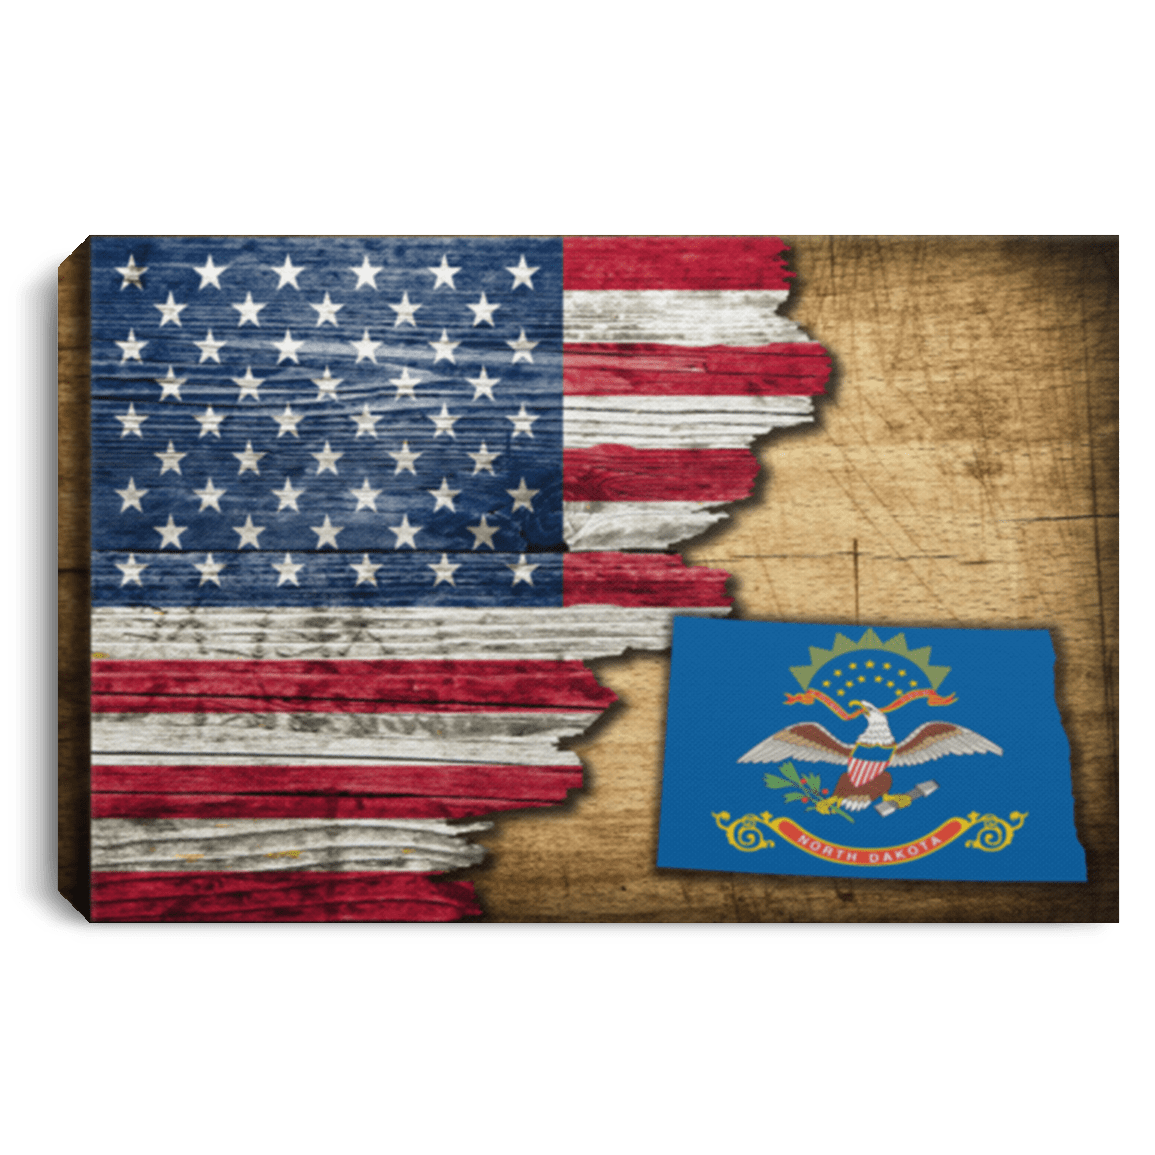 United States/North Dakota Flag Ripped Effect 12X8 Inches Landscape Canvas .75In Frame